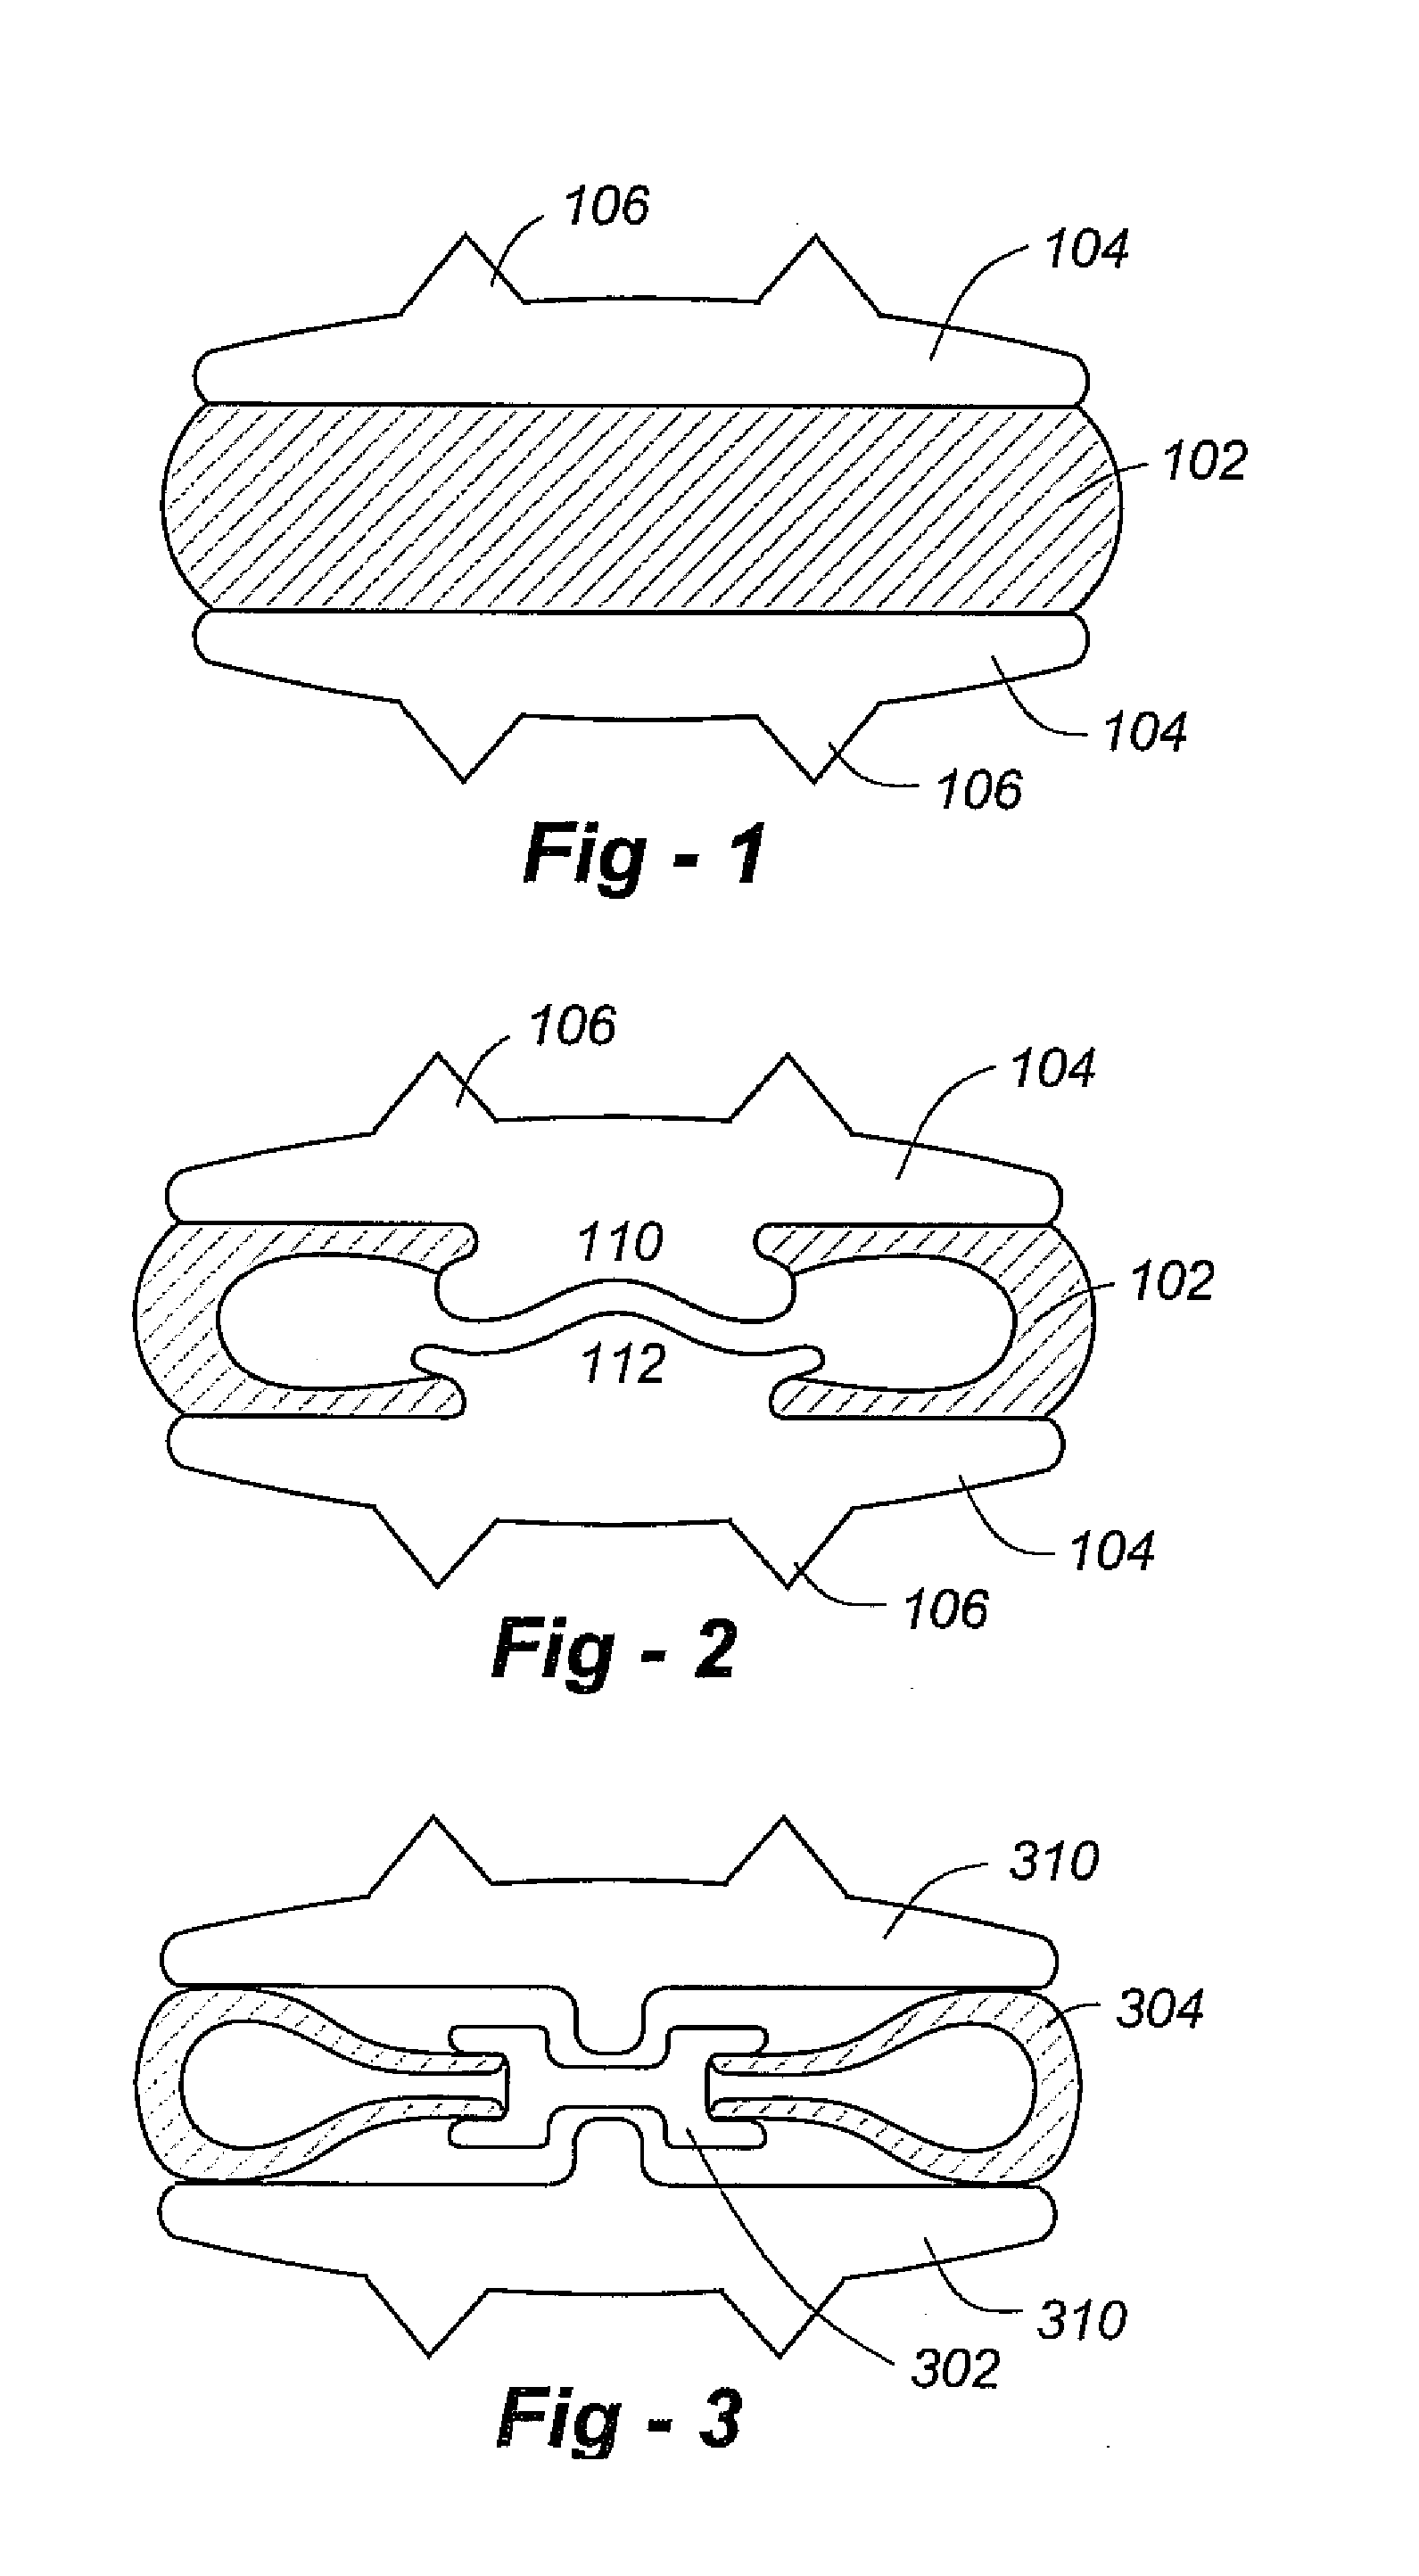 Artificial intervertebral disc replacements with endplates